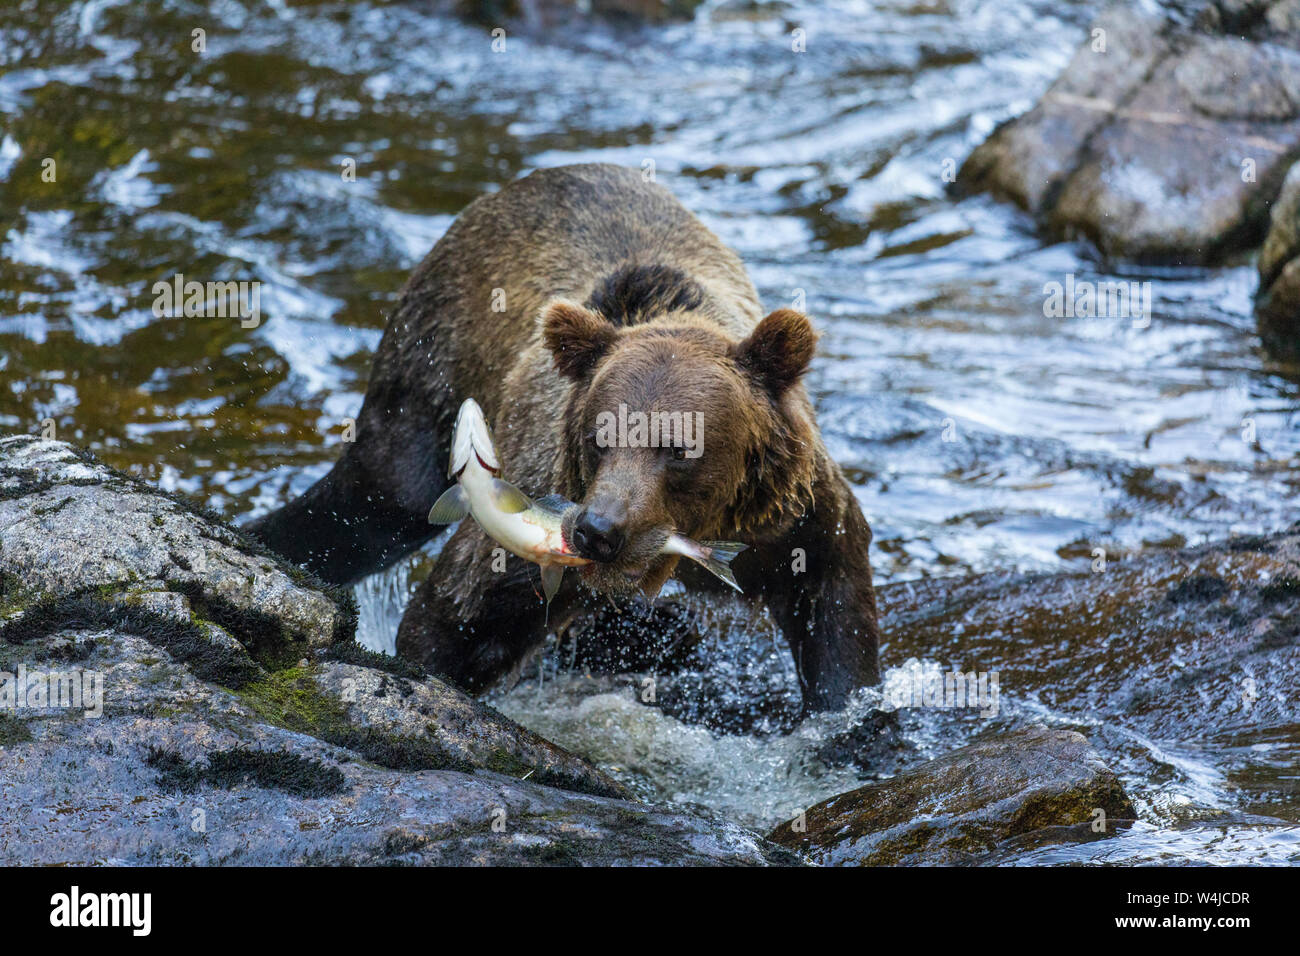 Orso grizzly pesca, Tongass National Forest, Alaska Foto Stock